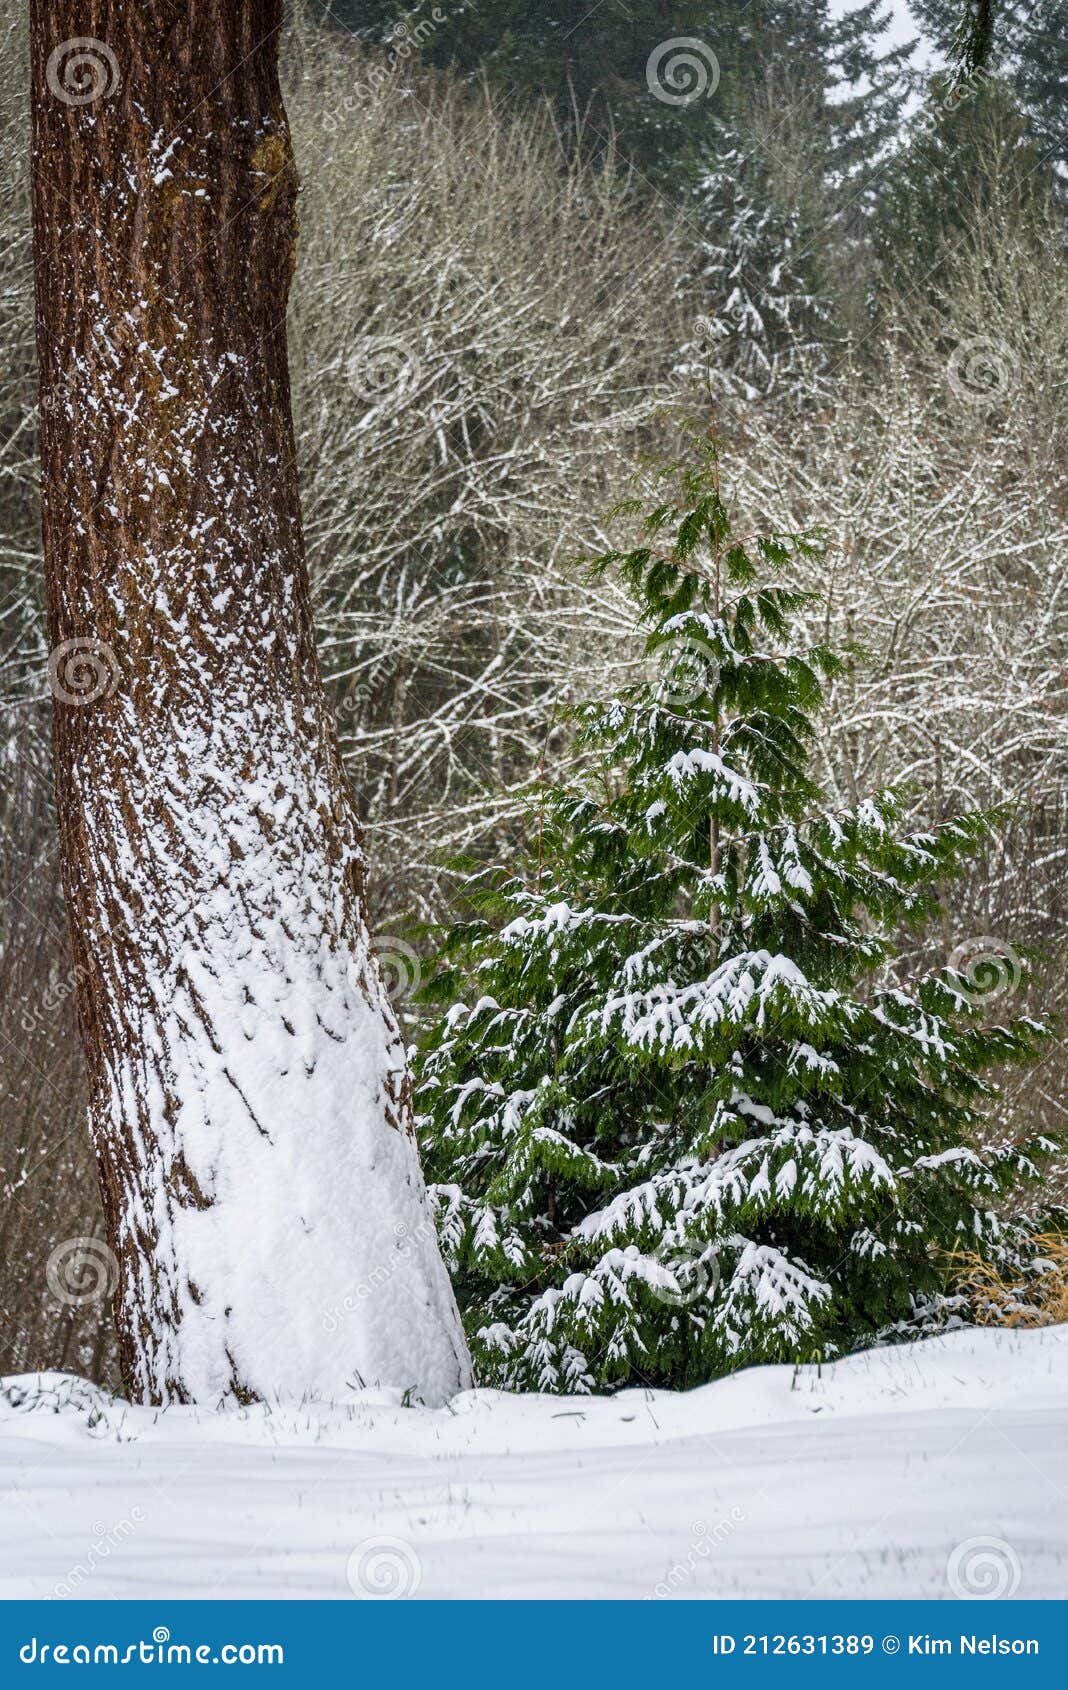 winter-wonderland-fresh-snowfall-in-the-landscape-evergreen-and